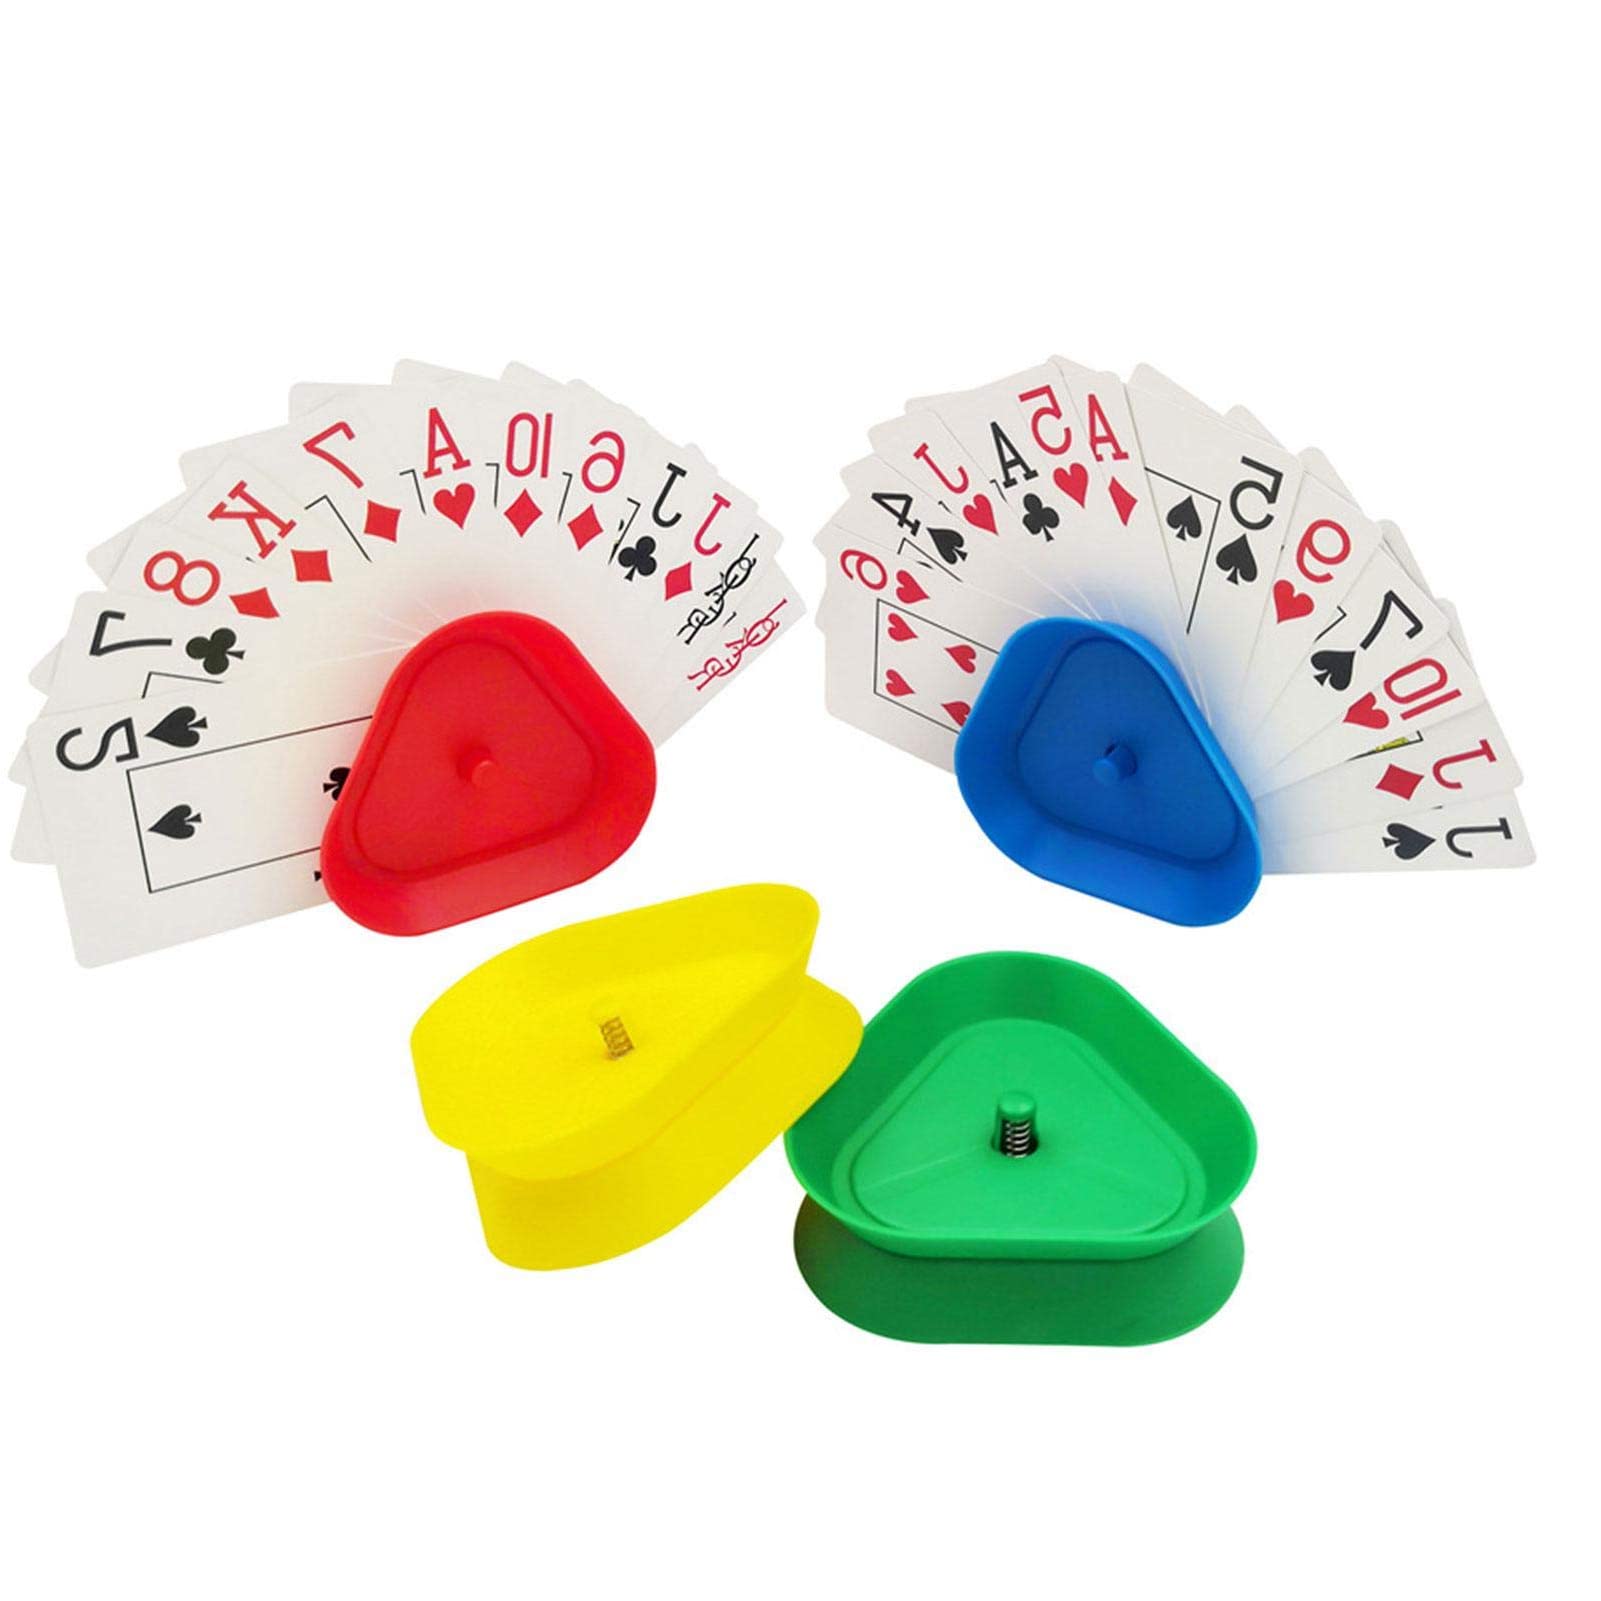 qzjijosen 4Pcs Playing Card Holder,Triangular Card Holders Tray for Cards Games, Plastic Hands-Free Cards Holders for Poker Canasta Parties Kids Seniors